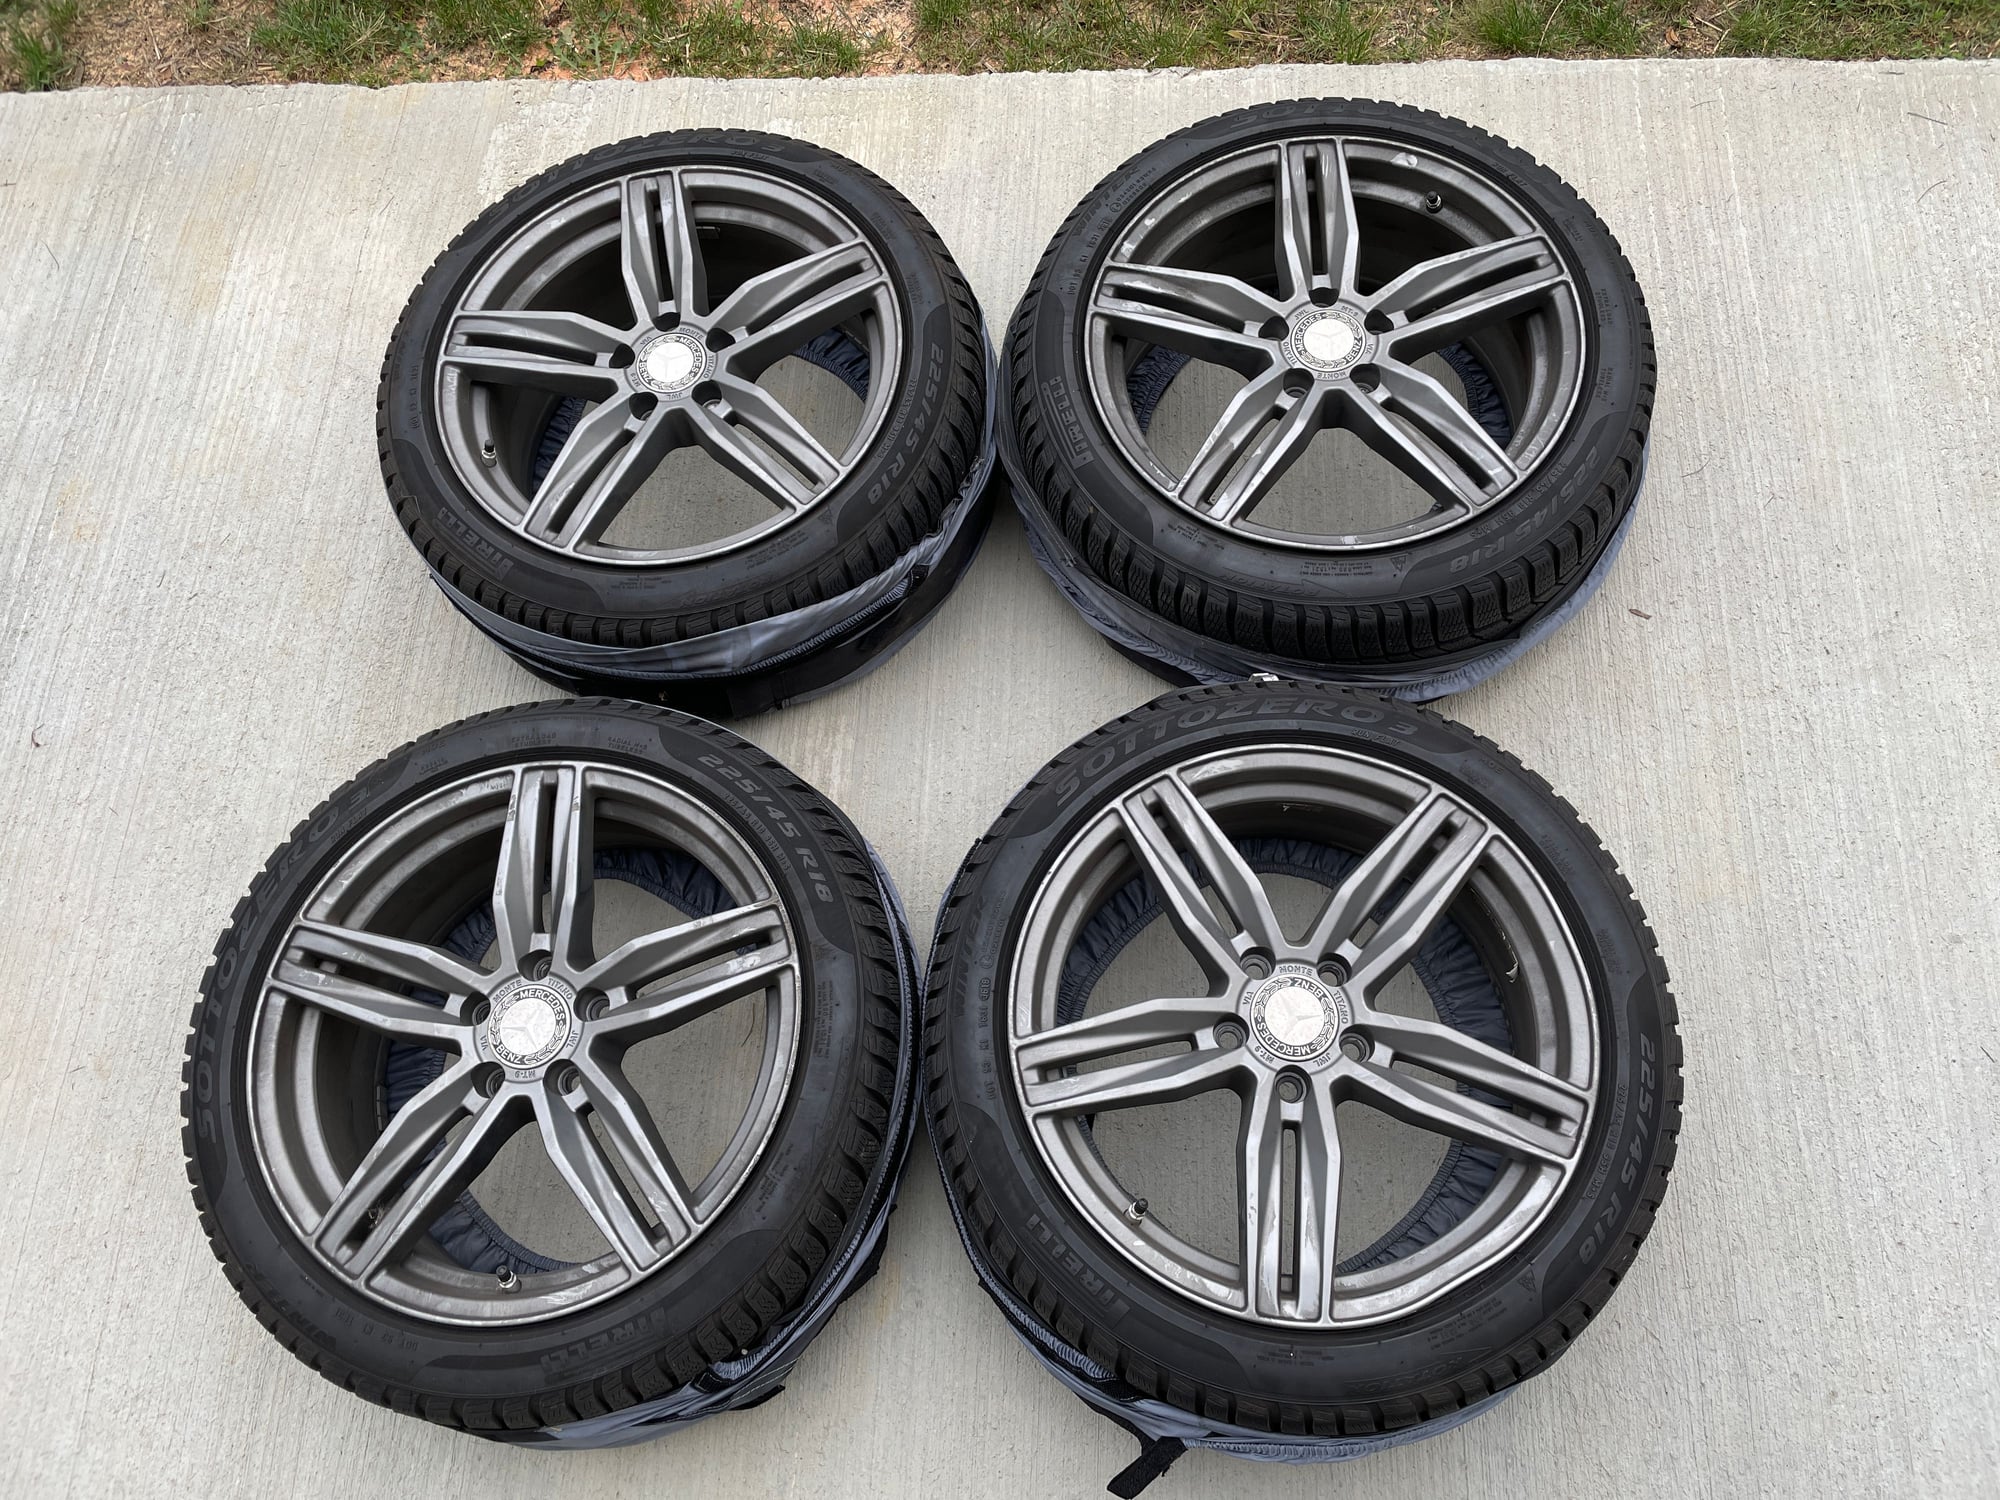 Wheels and Tires/Axles - 18" Aftermarket Rims, Pirelli Sottozero 3 Snow Tires, Covers, Centercaps and TPMS - Used - 2015 to 2021 Mercedes-Benz C-Class - Beacon, NY 12508, United States